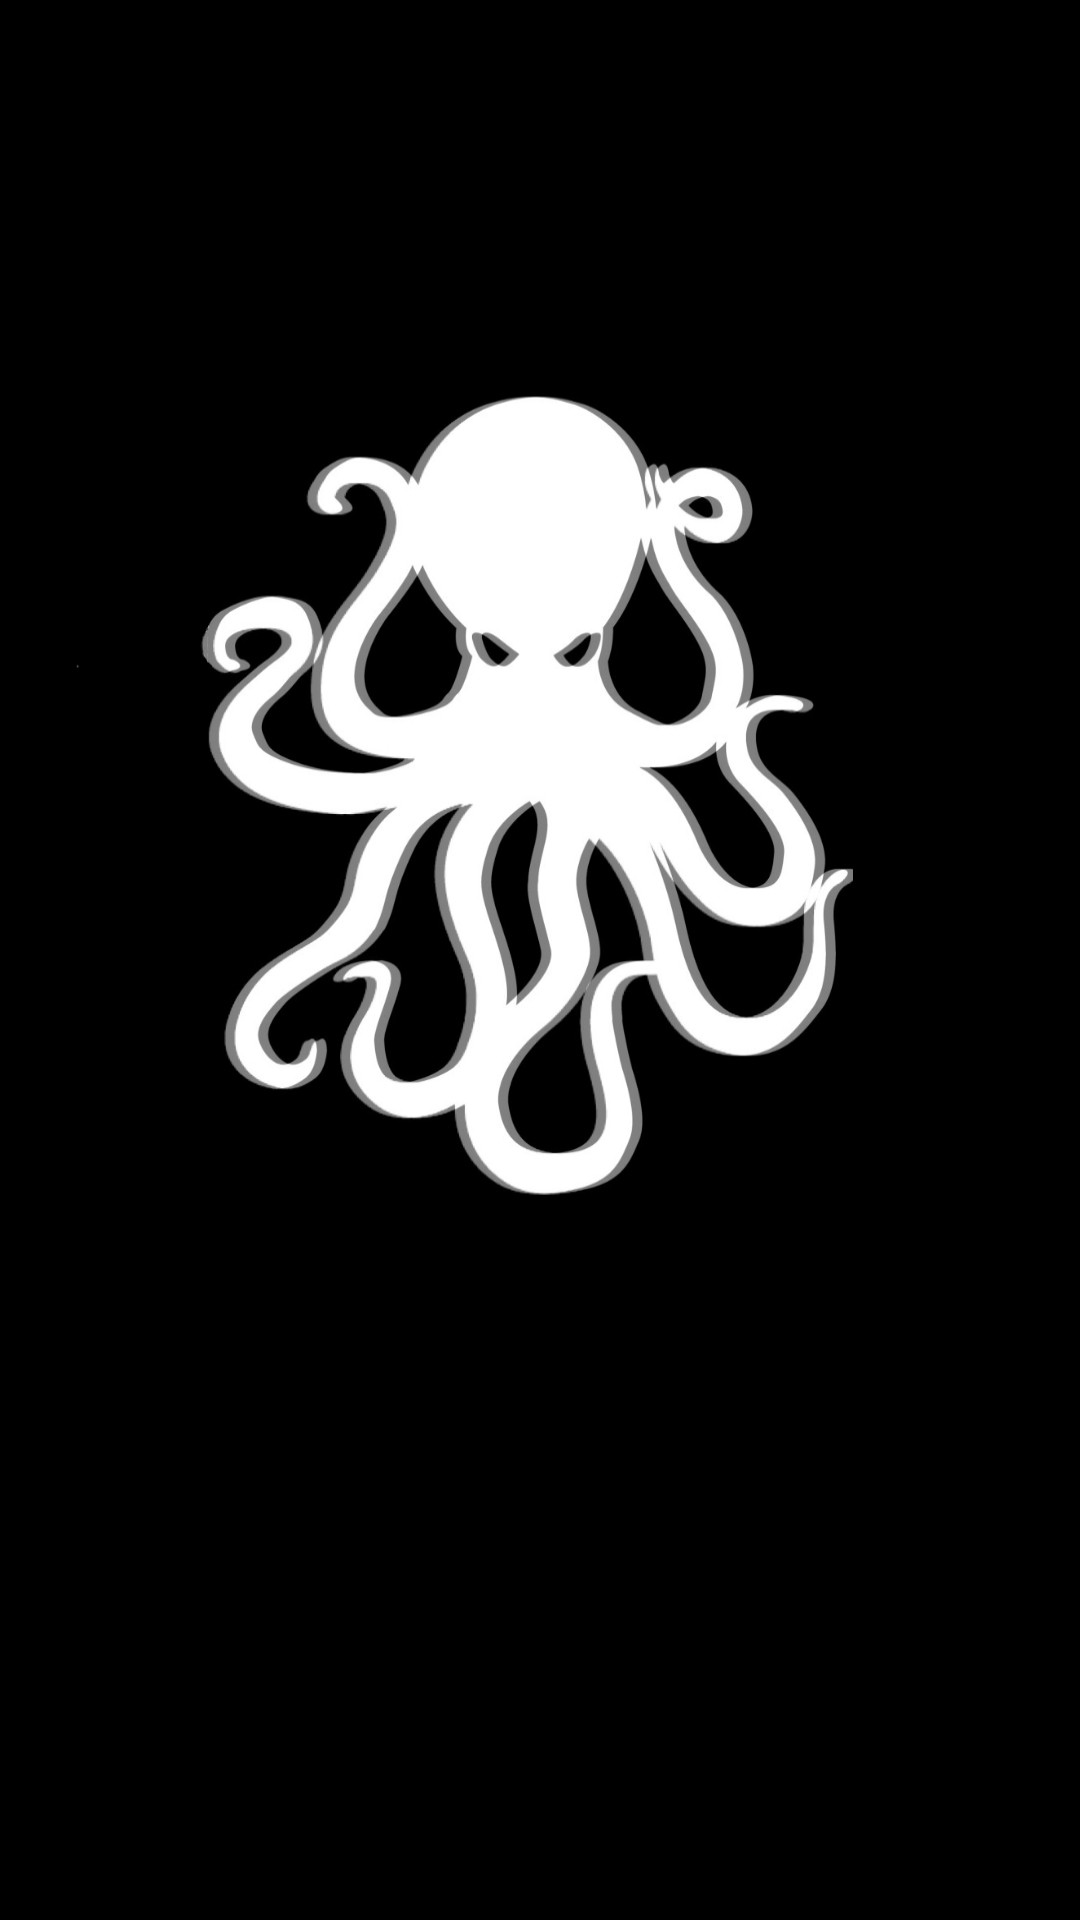 1080x1920 I made a HMNIM octopus wallpaper. Feel free to use it!